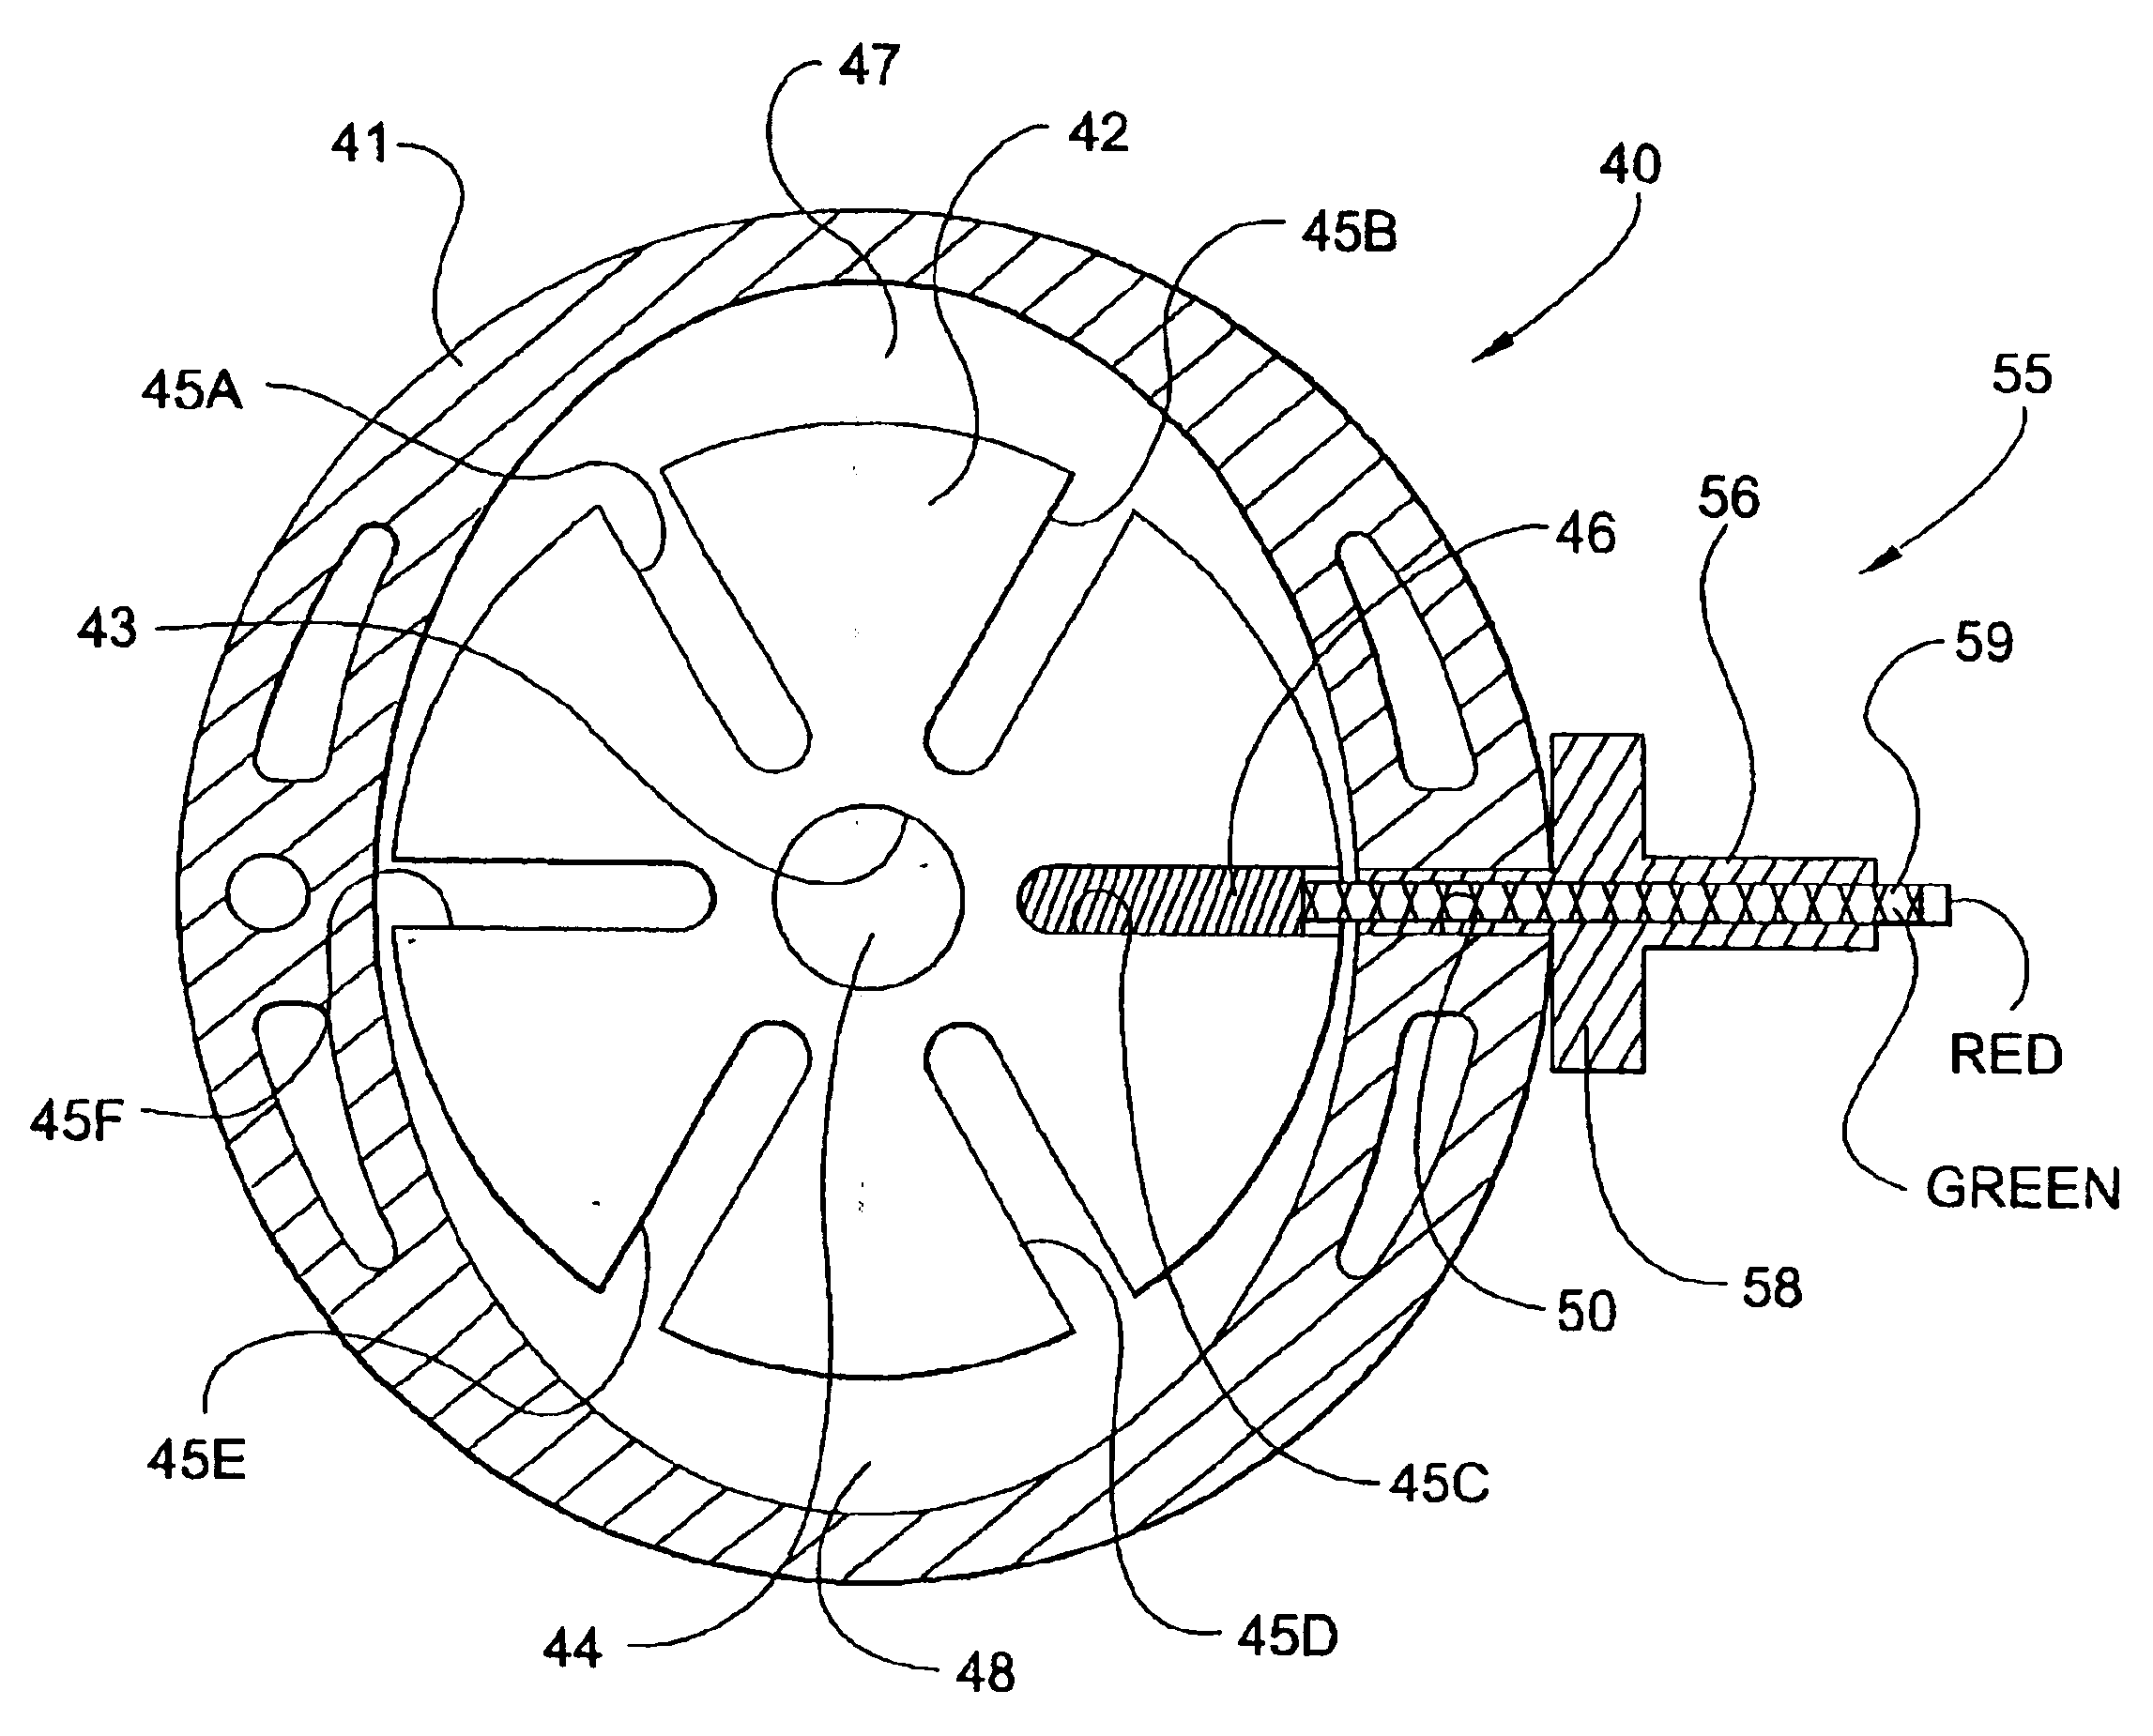 Rotary vane pump with vane wear access port and method